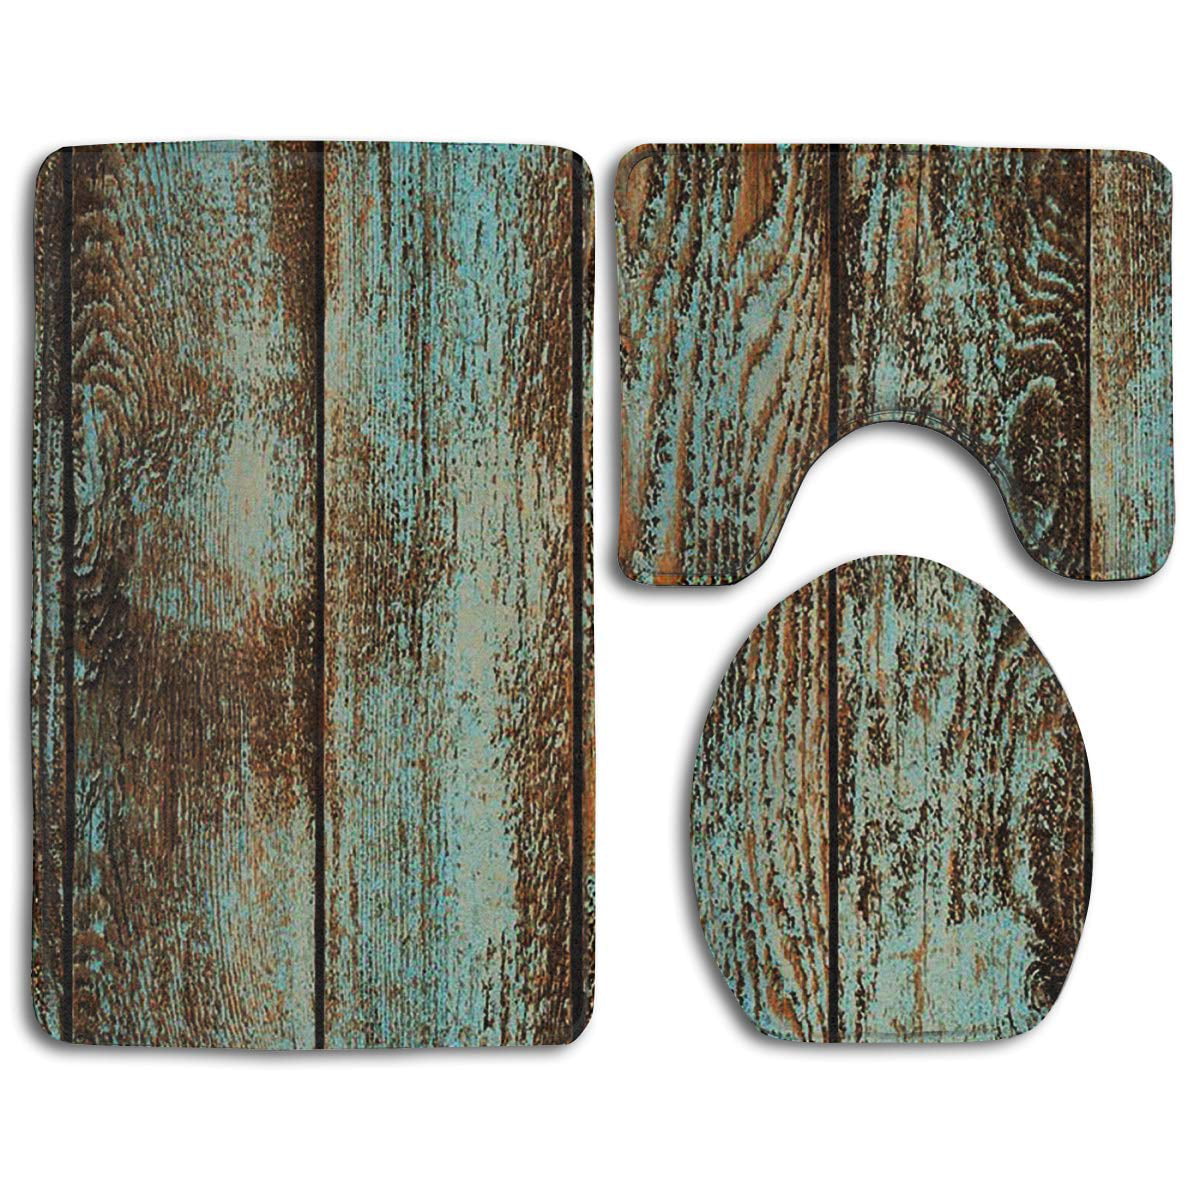 Gohao Rustic Old Barn Wood 3 Piece, Brown And Turquoise Bathroom Rugs